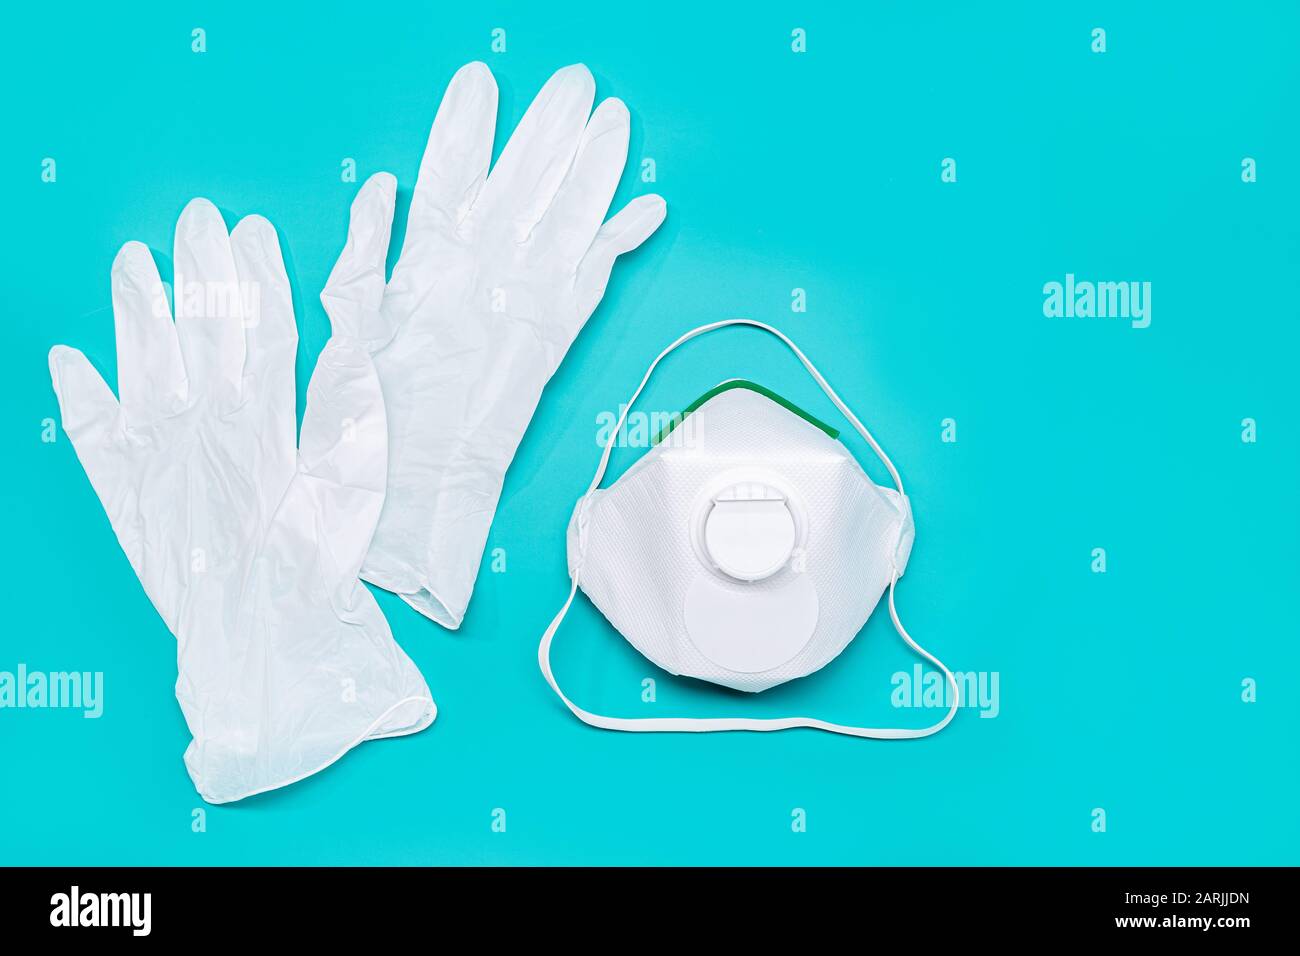 Safety mask and protective gloves isolated on green background. Virus or pollution protection concept. Copy space Stock Photo